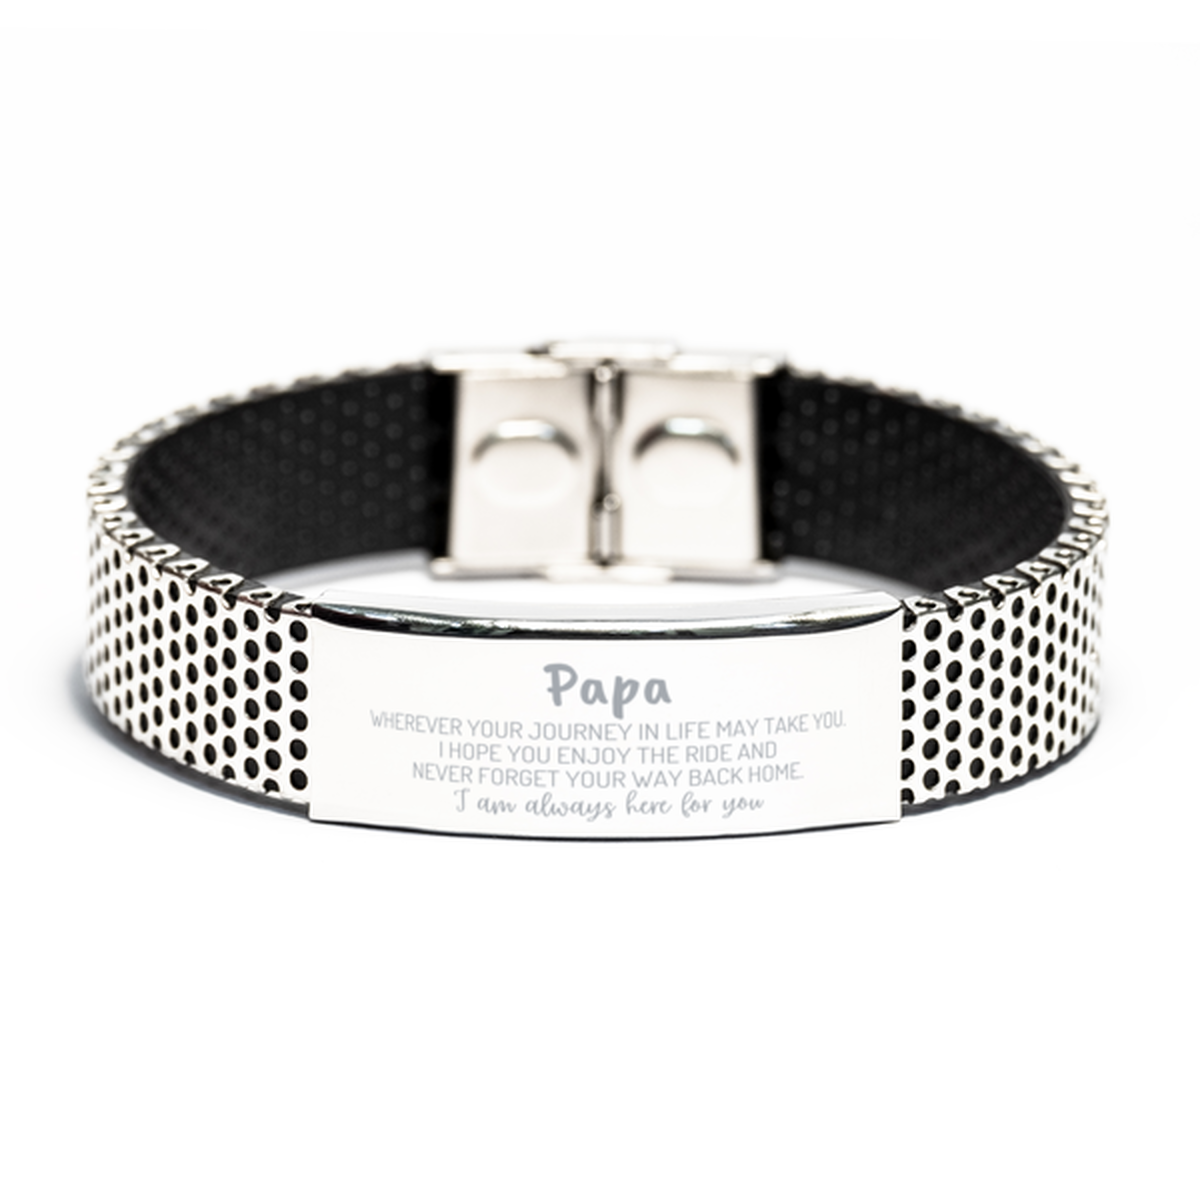 Papa wherever your journey in life may take you, I am always here for you Papa Stainless Steel Bracelet, Awesome Christmas Gifts For Papa, Papa Birthday Gifts for Men Women Family Loved One